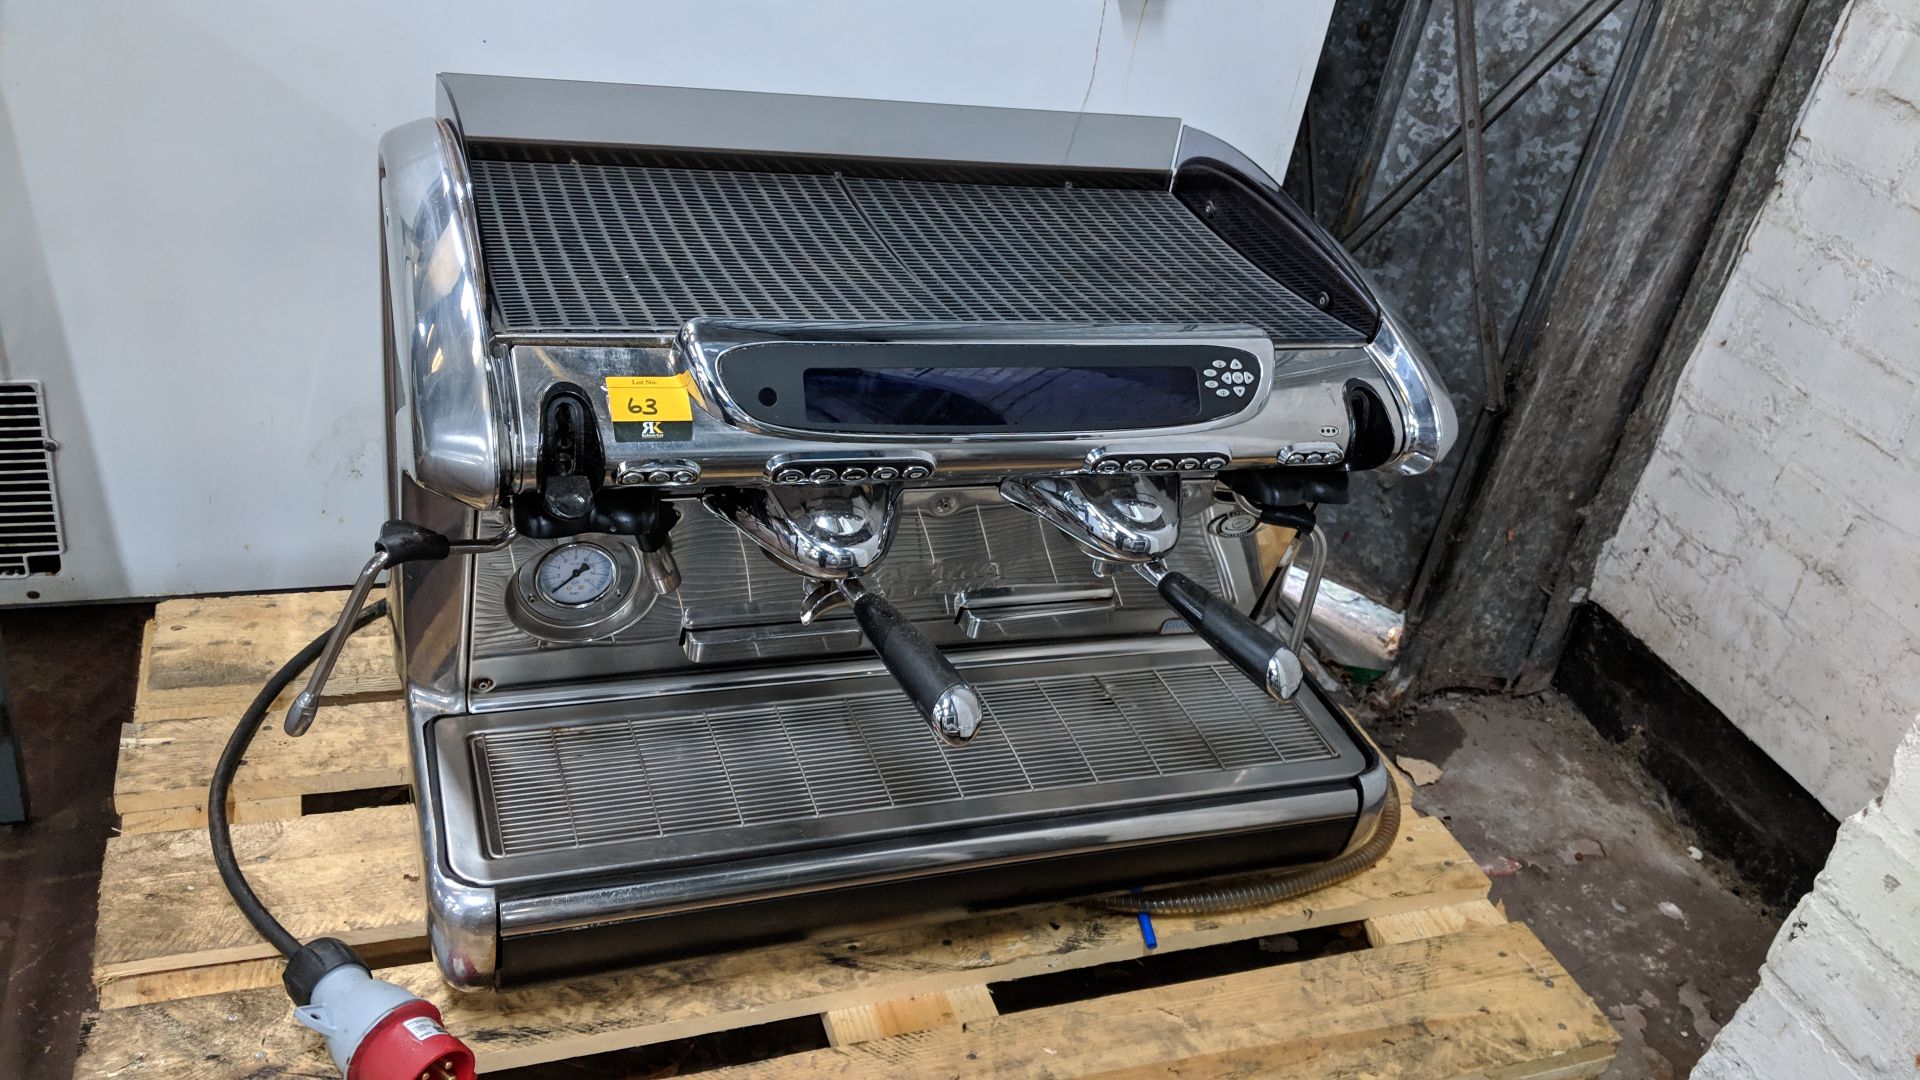 Faema Emblema traditional commercial twin head espresso machine with large digital panel, LED - Image 7 of 7